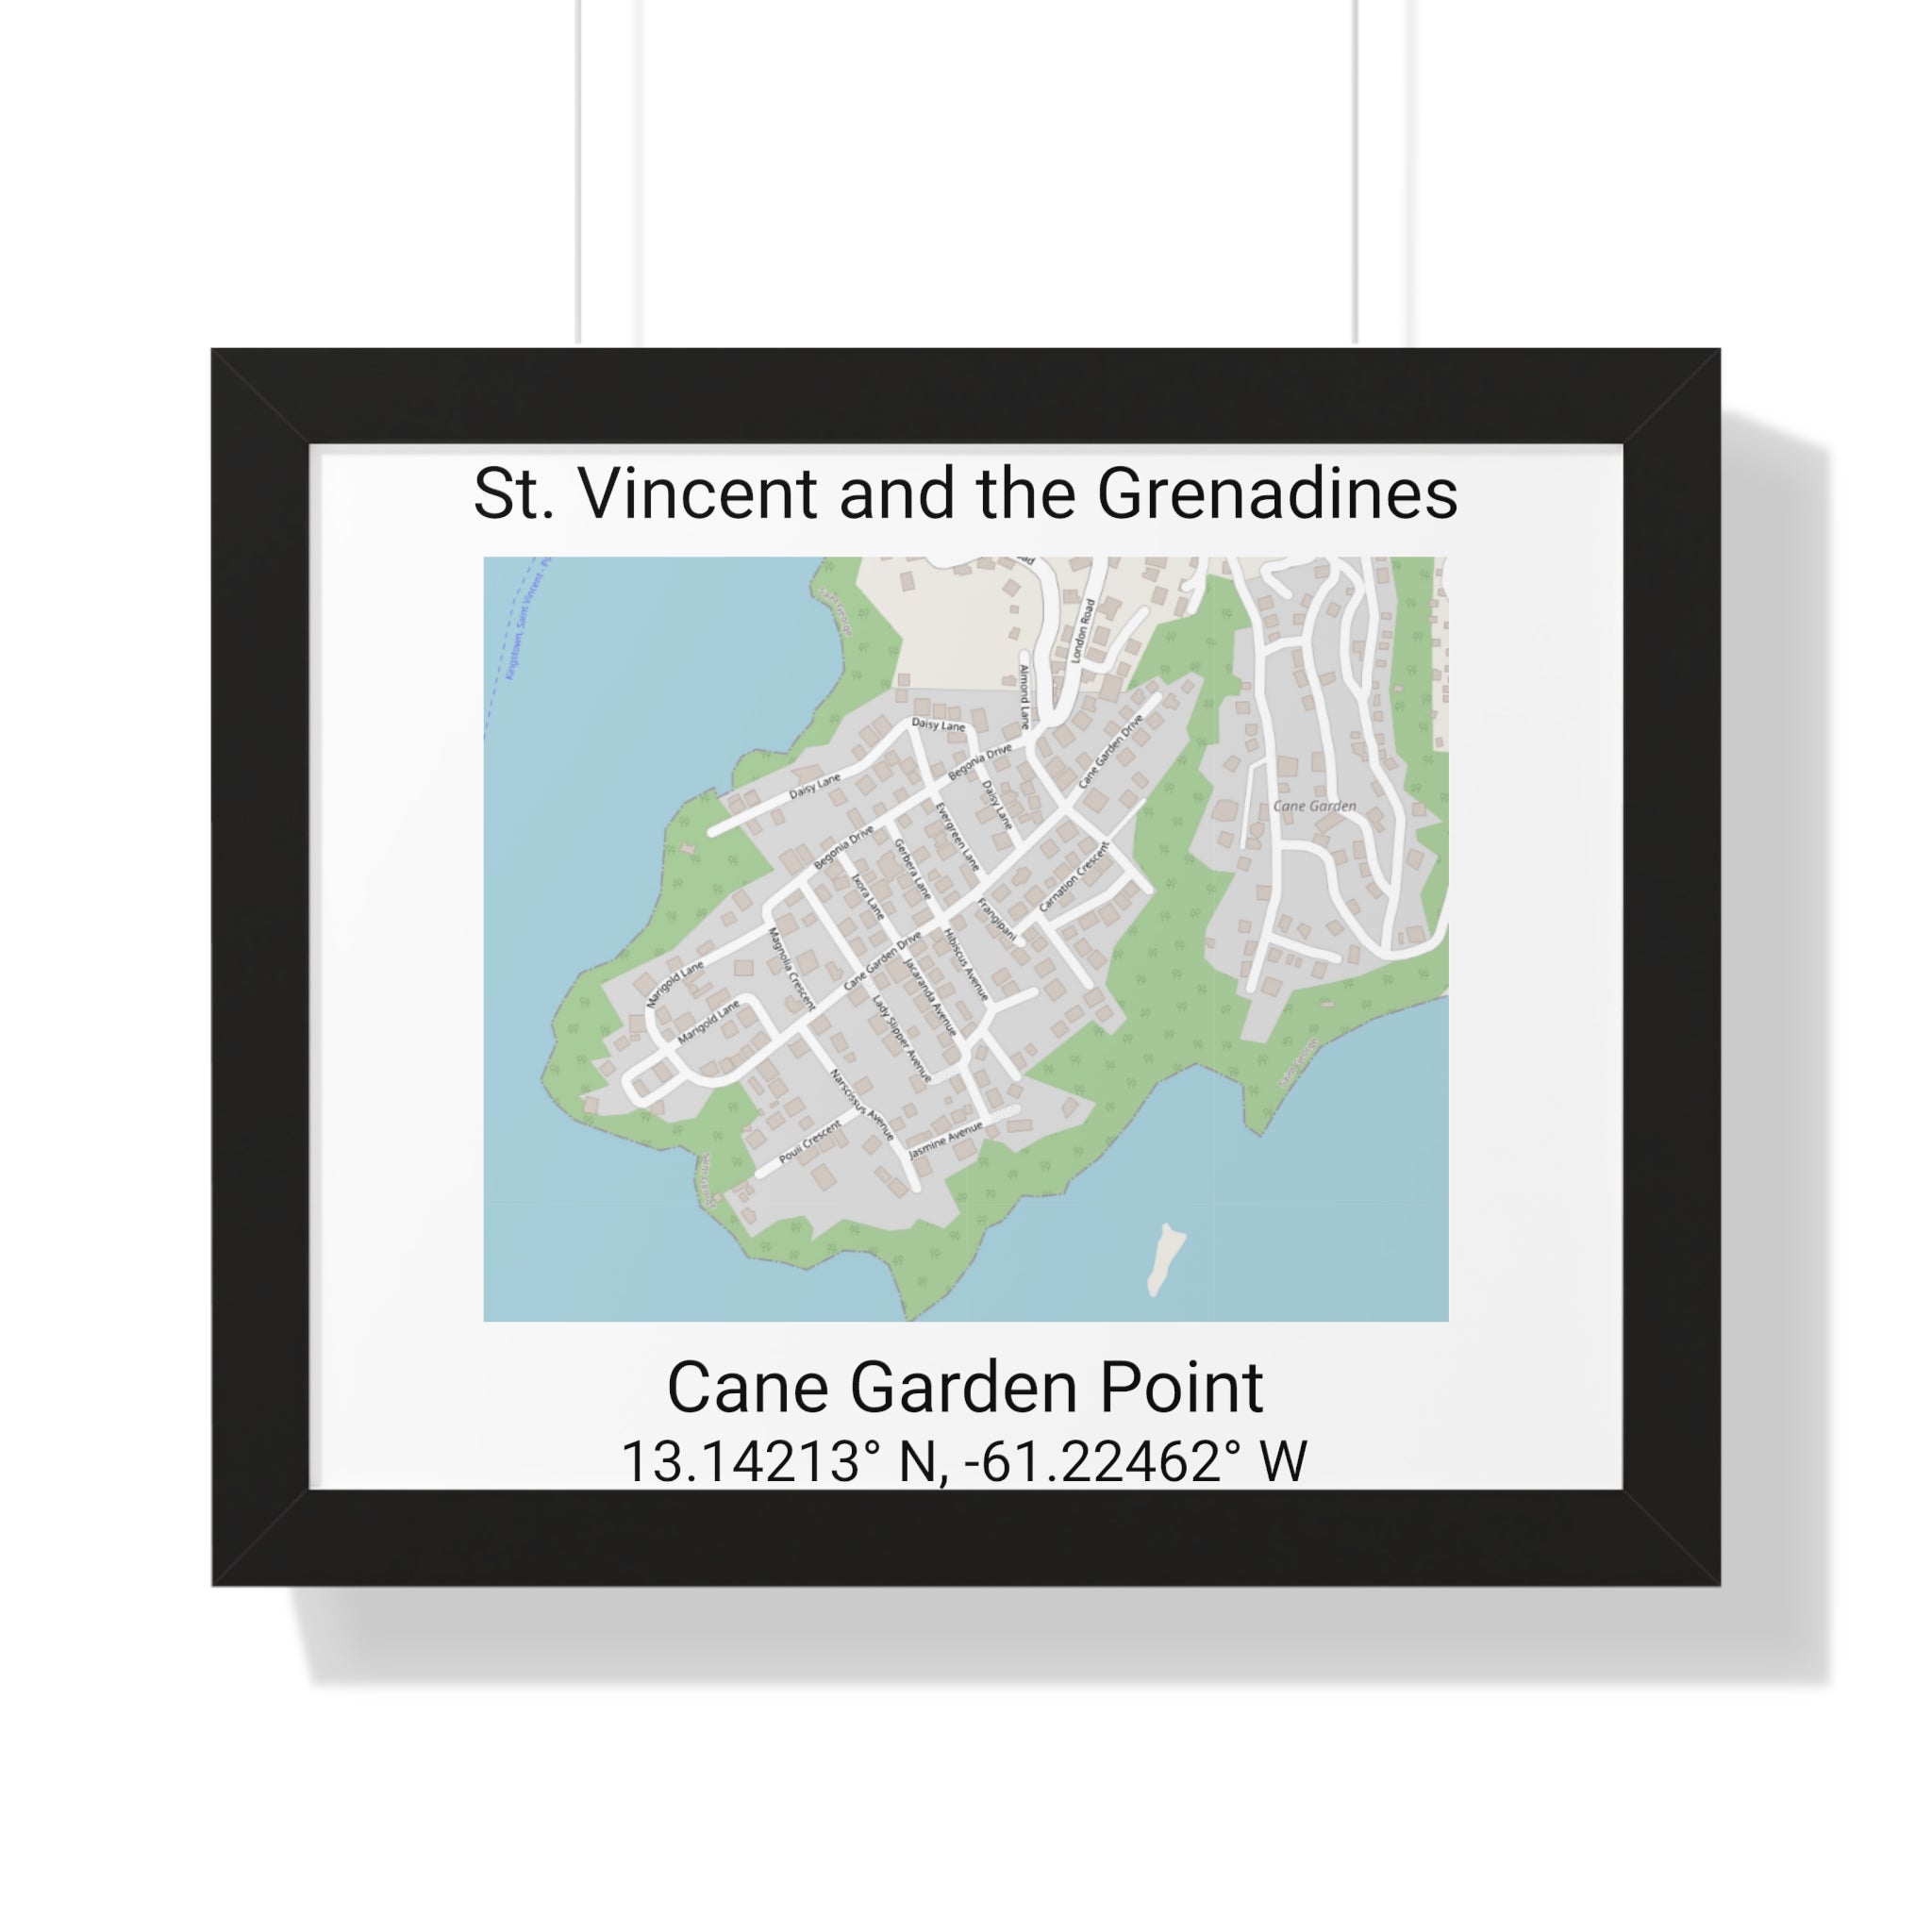 Framed map poster of Cane Garden Point in St. Vincent and the Grenadines